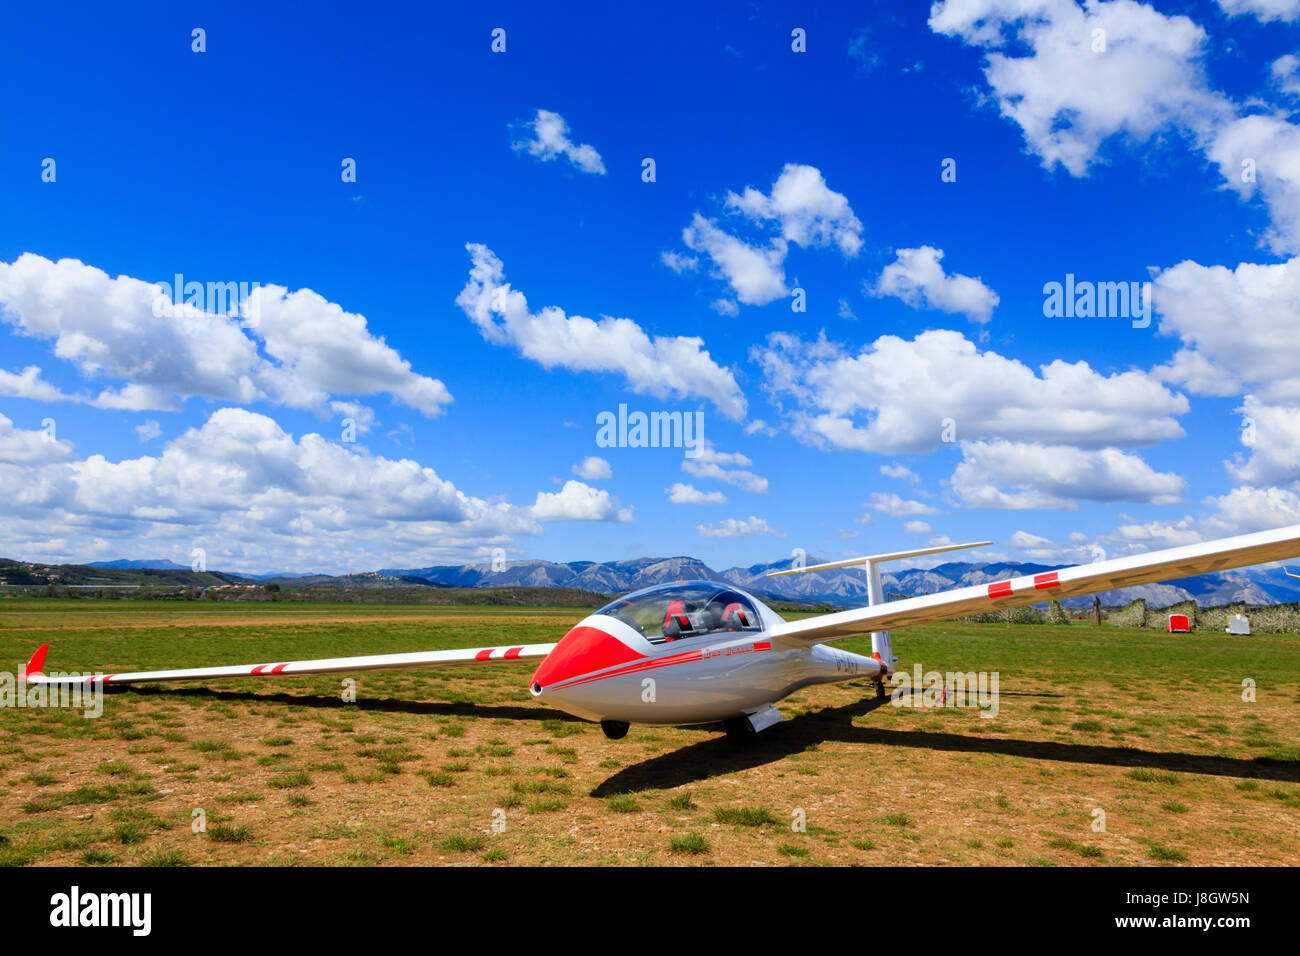 Schempp-Hirth Duo Discus glider on the ground at Sisteron, France, with a sky full of clouds Stock Photo